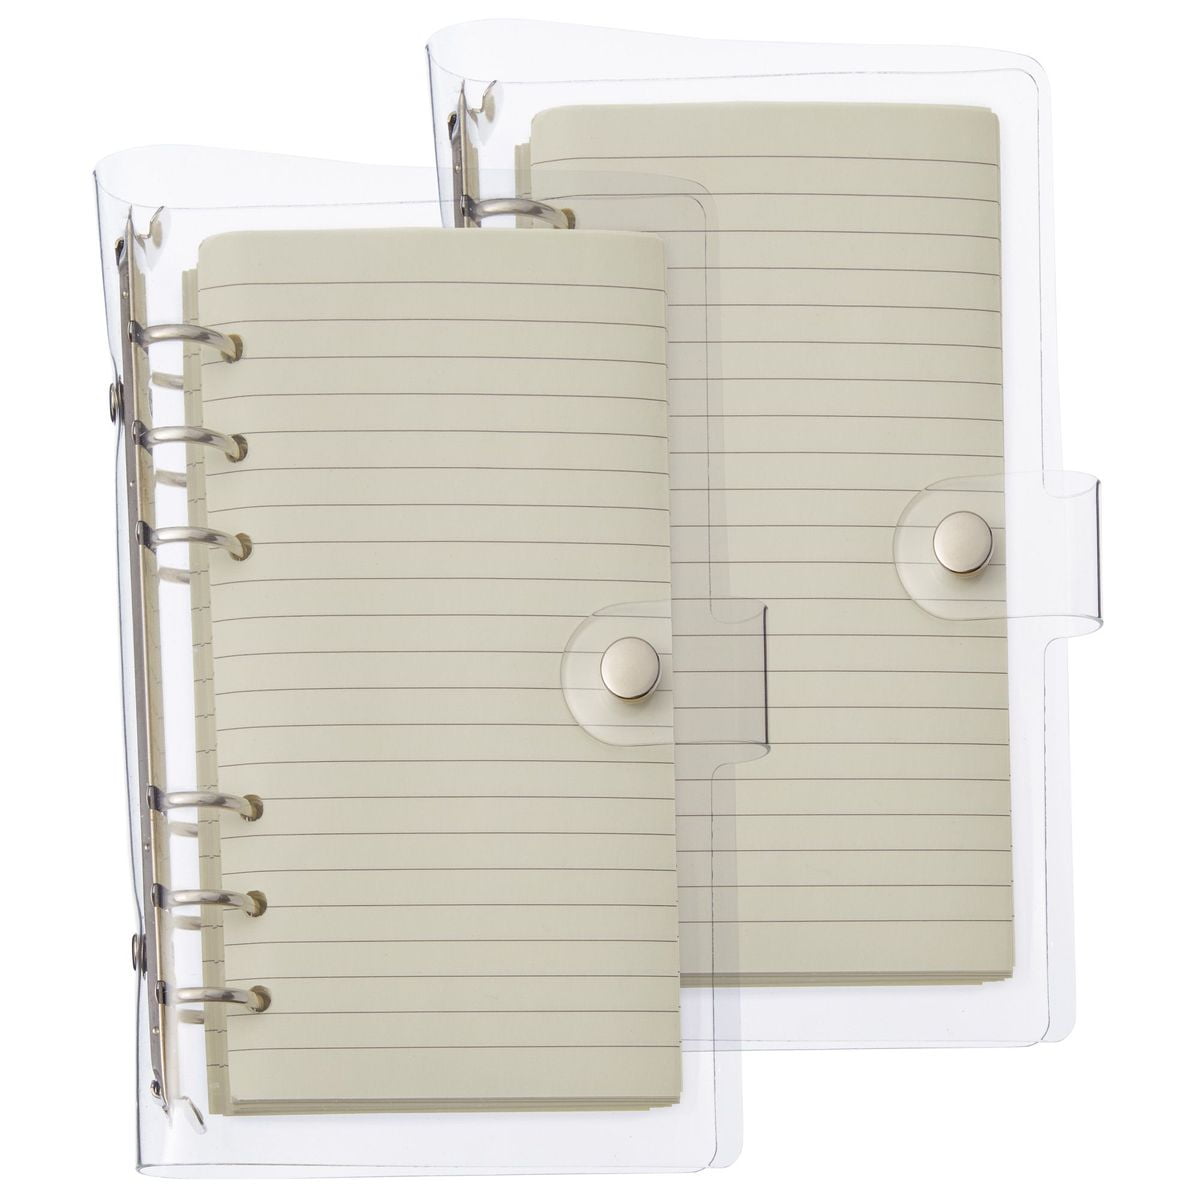 80 Sheets A5 6-Ring Binder Cover with Snap Button Closure Refill Sheets Notebook 